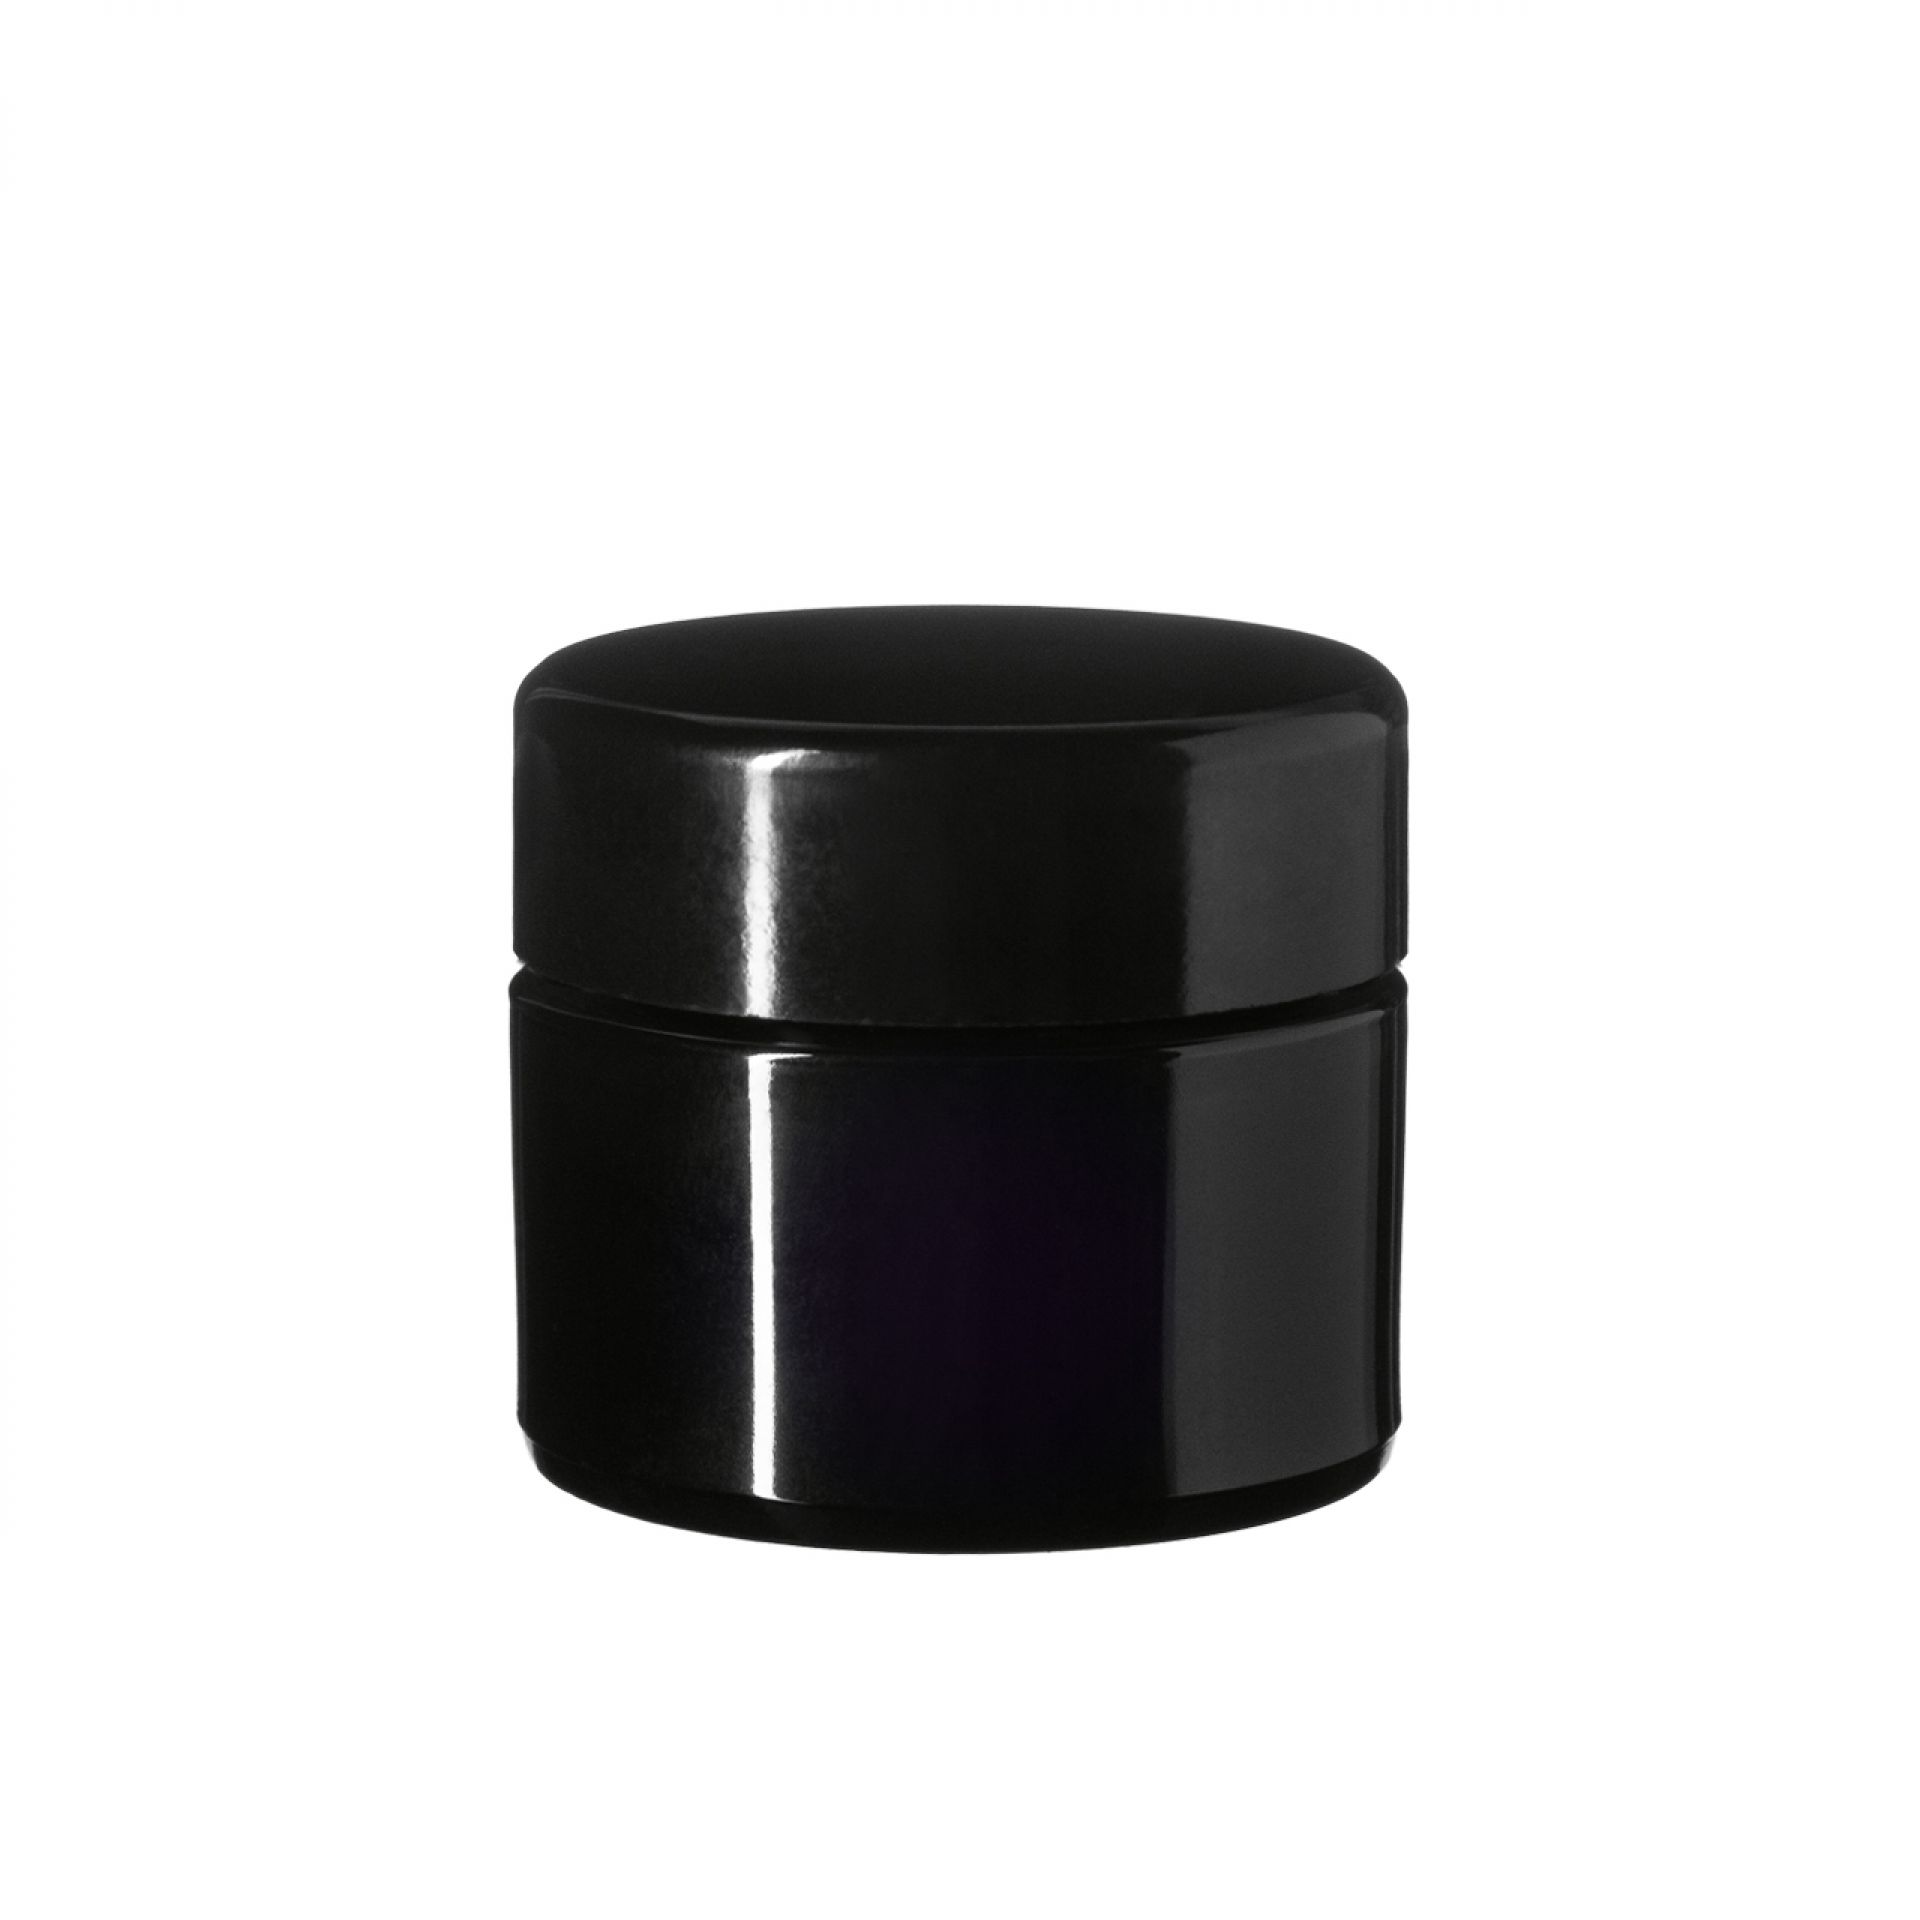 Lid Modern 47 special, UREA, black, semi-glossy finish, violet Phan inlay (Ceres 30)